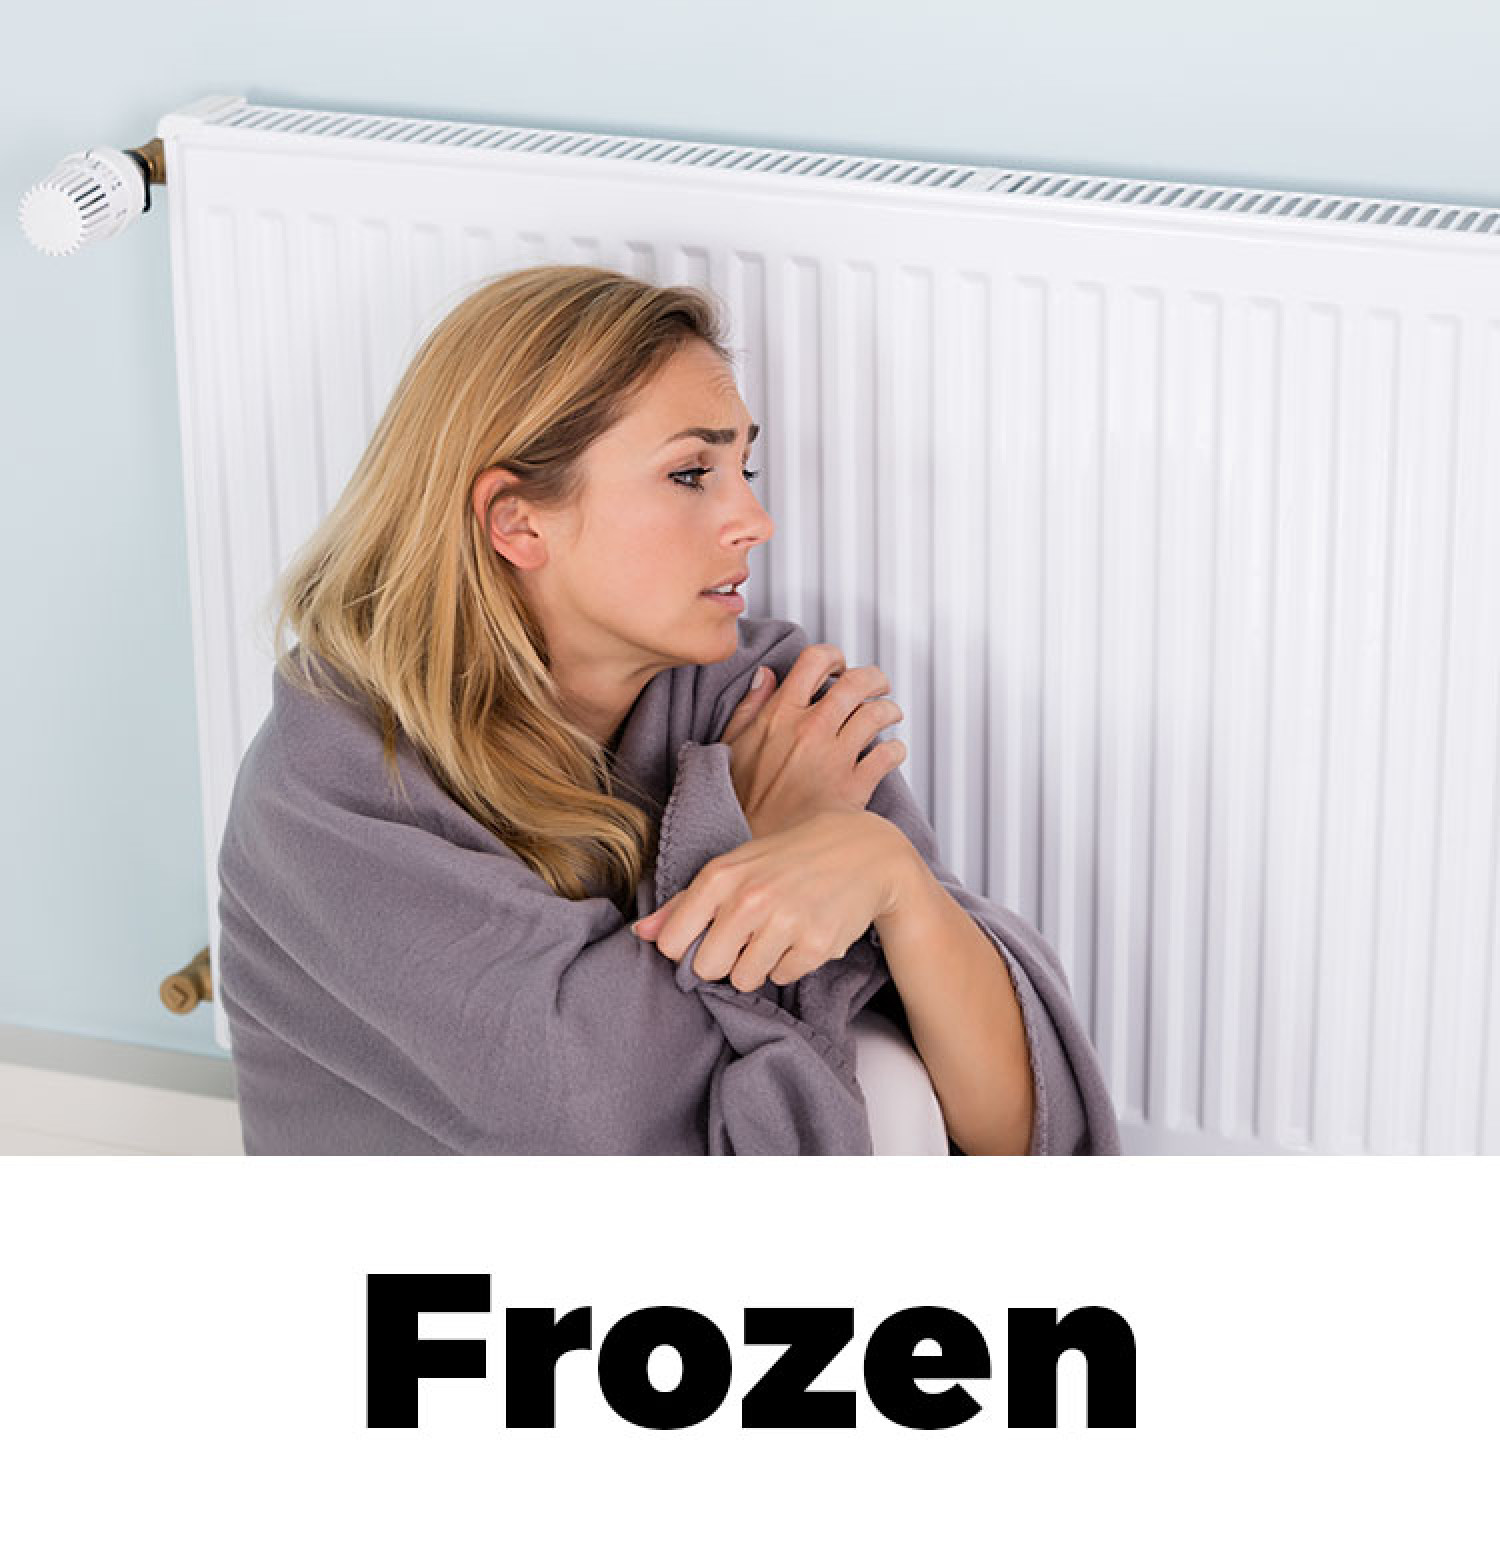 Recreating Disney Films at Home: Frozen Infographic